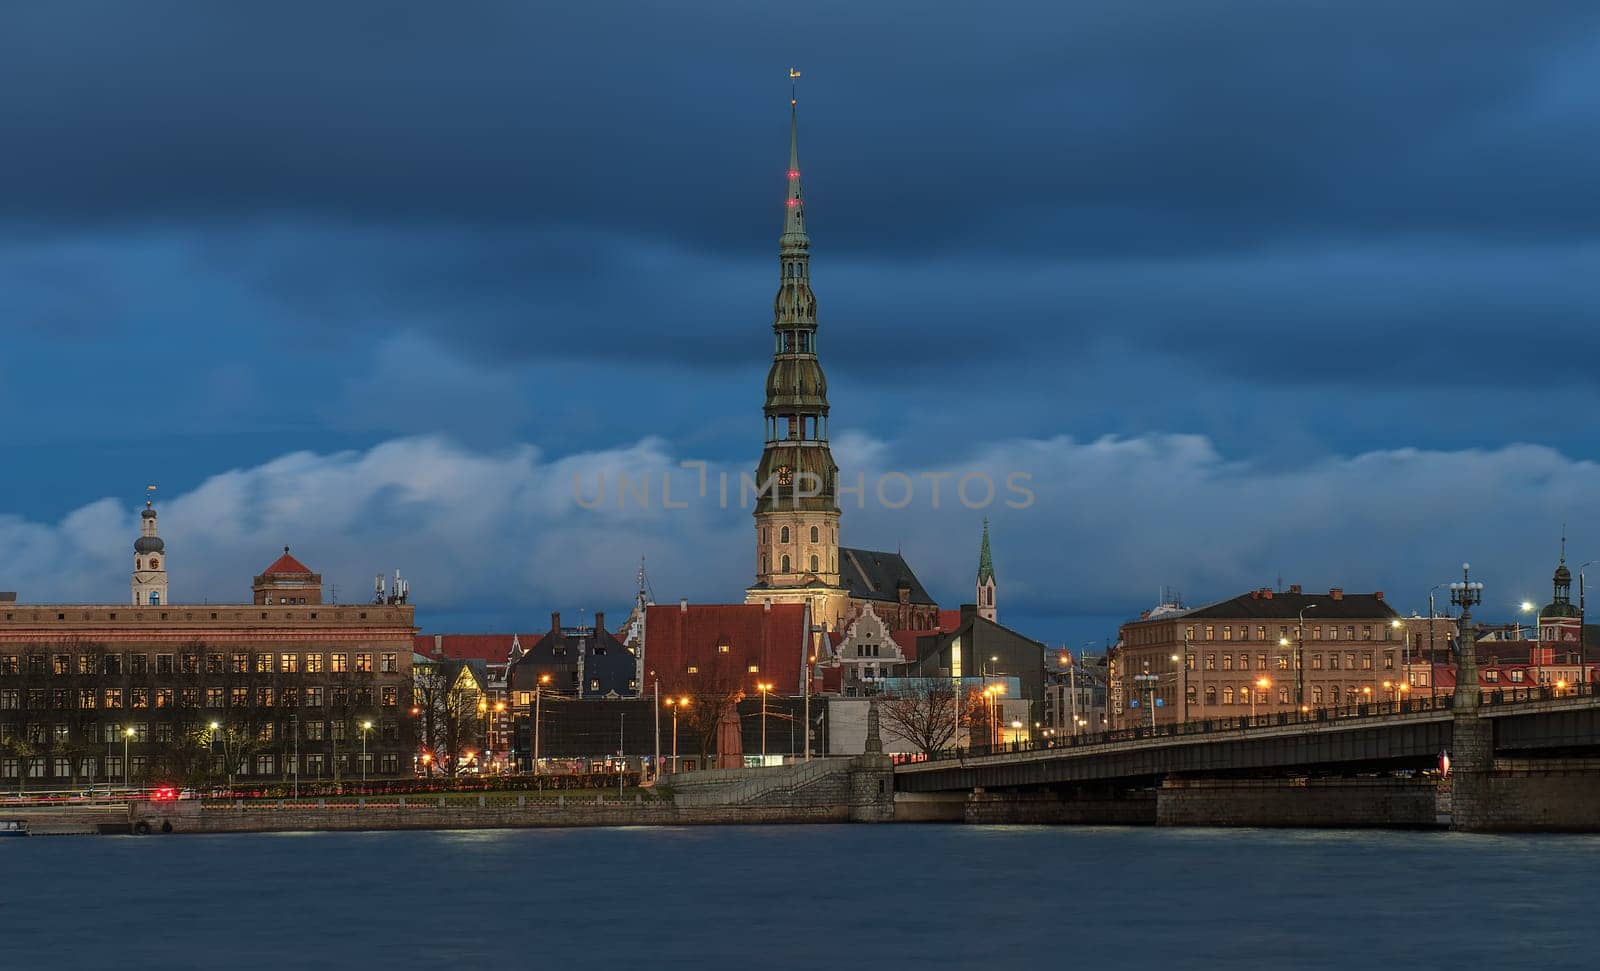 view of Old Riga across the Daugava River, view of St. Peter's Church and Town Hall Square 1 by Mixa74